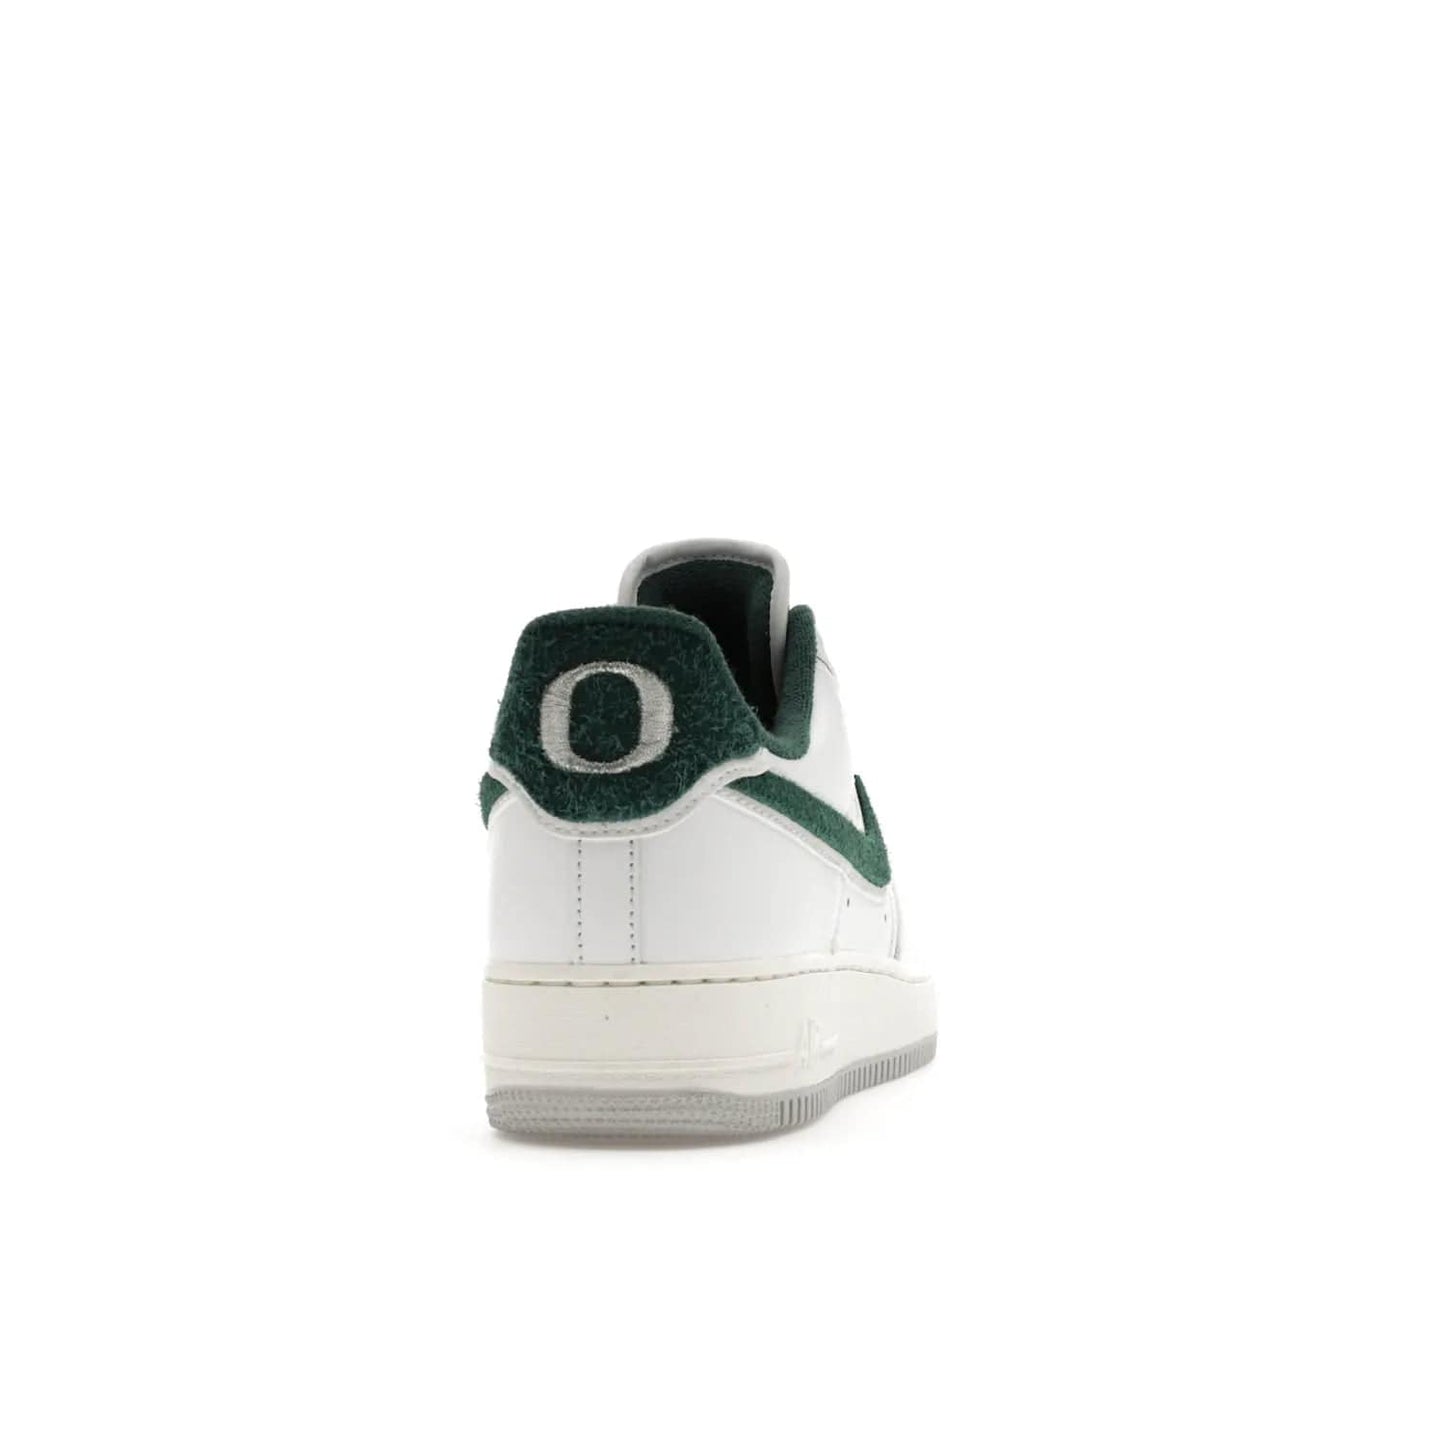 Nike Air Force 1 Low '07 Premium University of Oregon PE - Image 29 - Only at www.BallersClubKickz.com - The Nike Air Force 1 Low '07 Premium. Special Oregon University colorway. White base with green and sail accents. Cushioned rubber midsole. Comfort and style. Support your school!